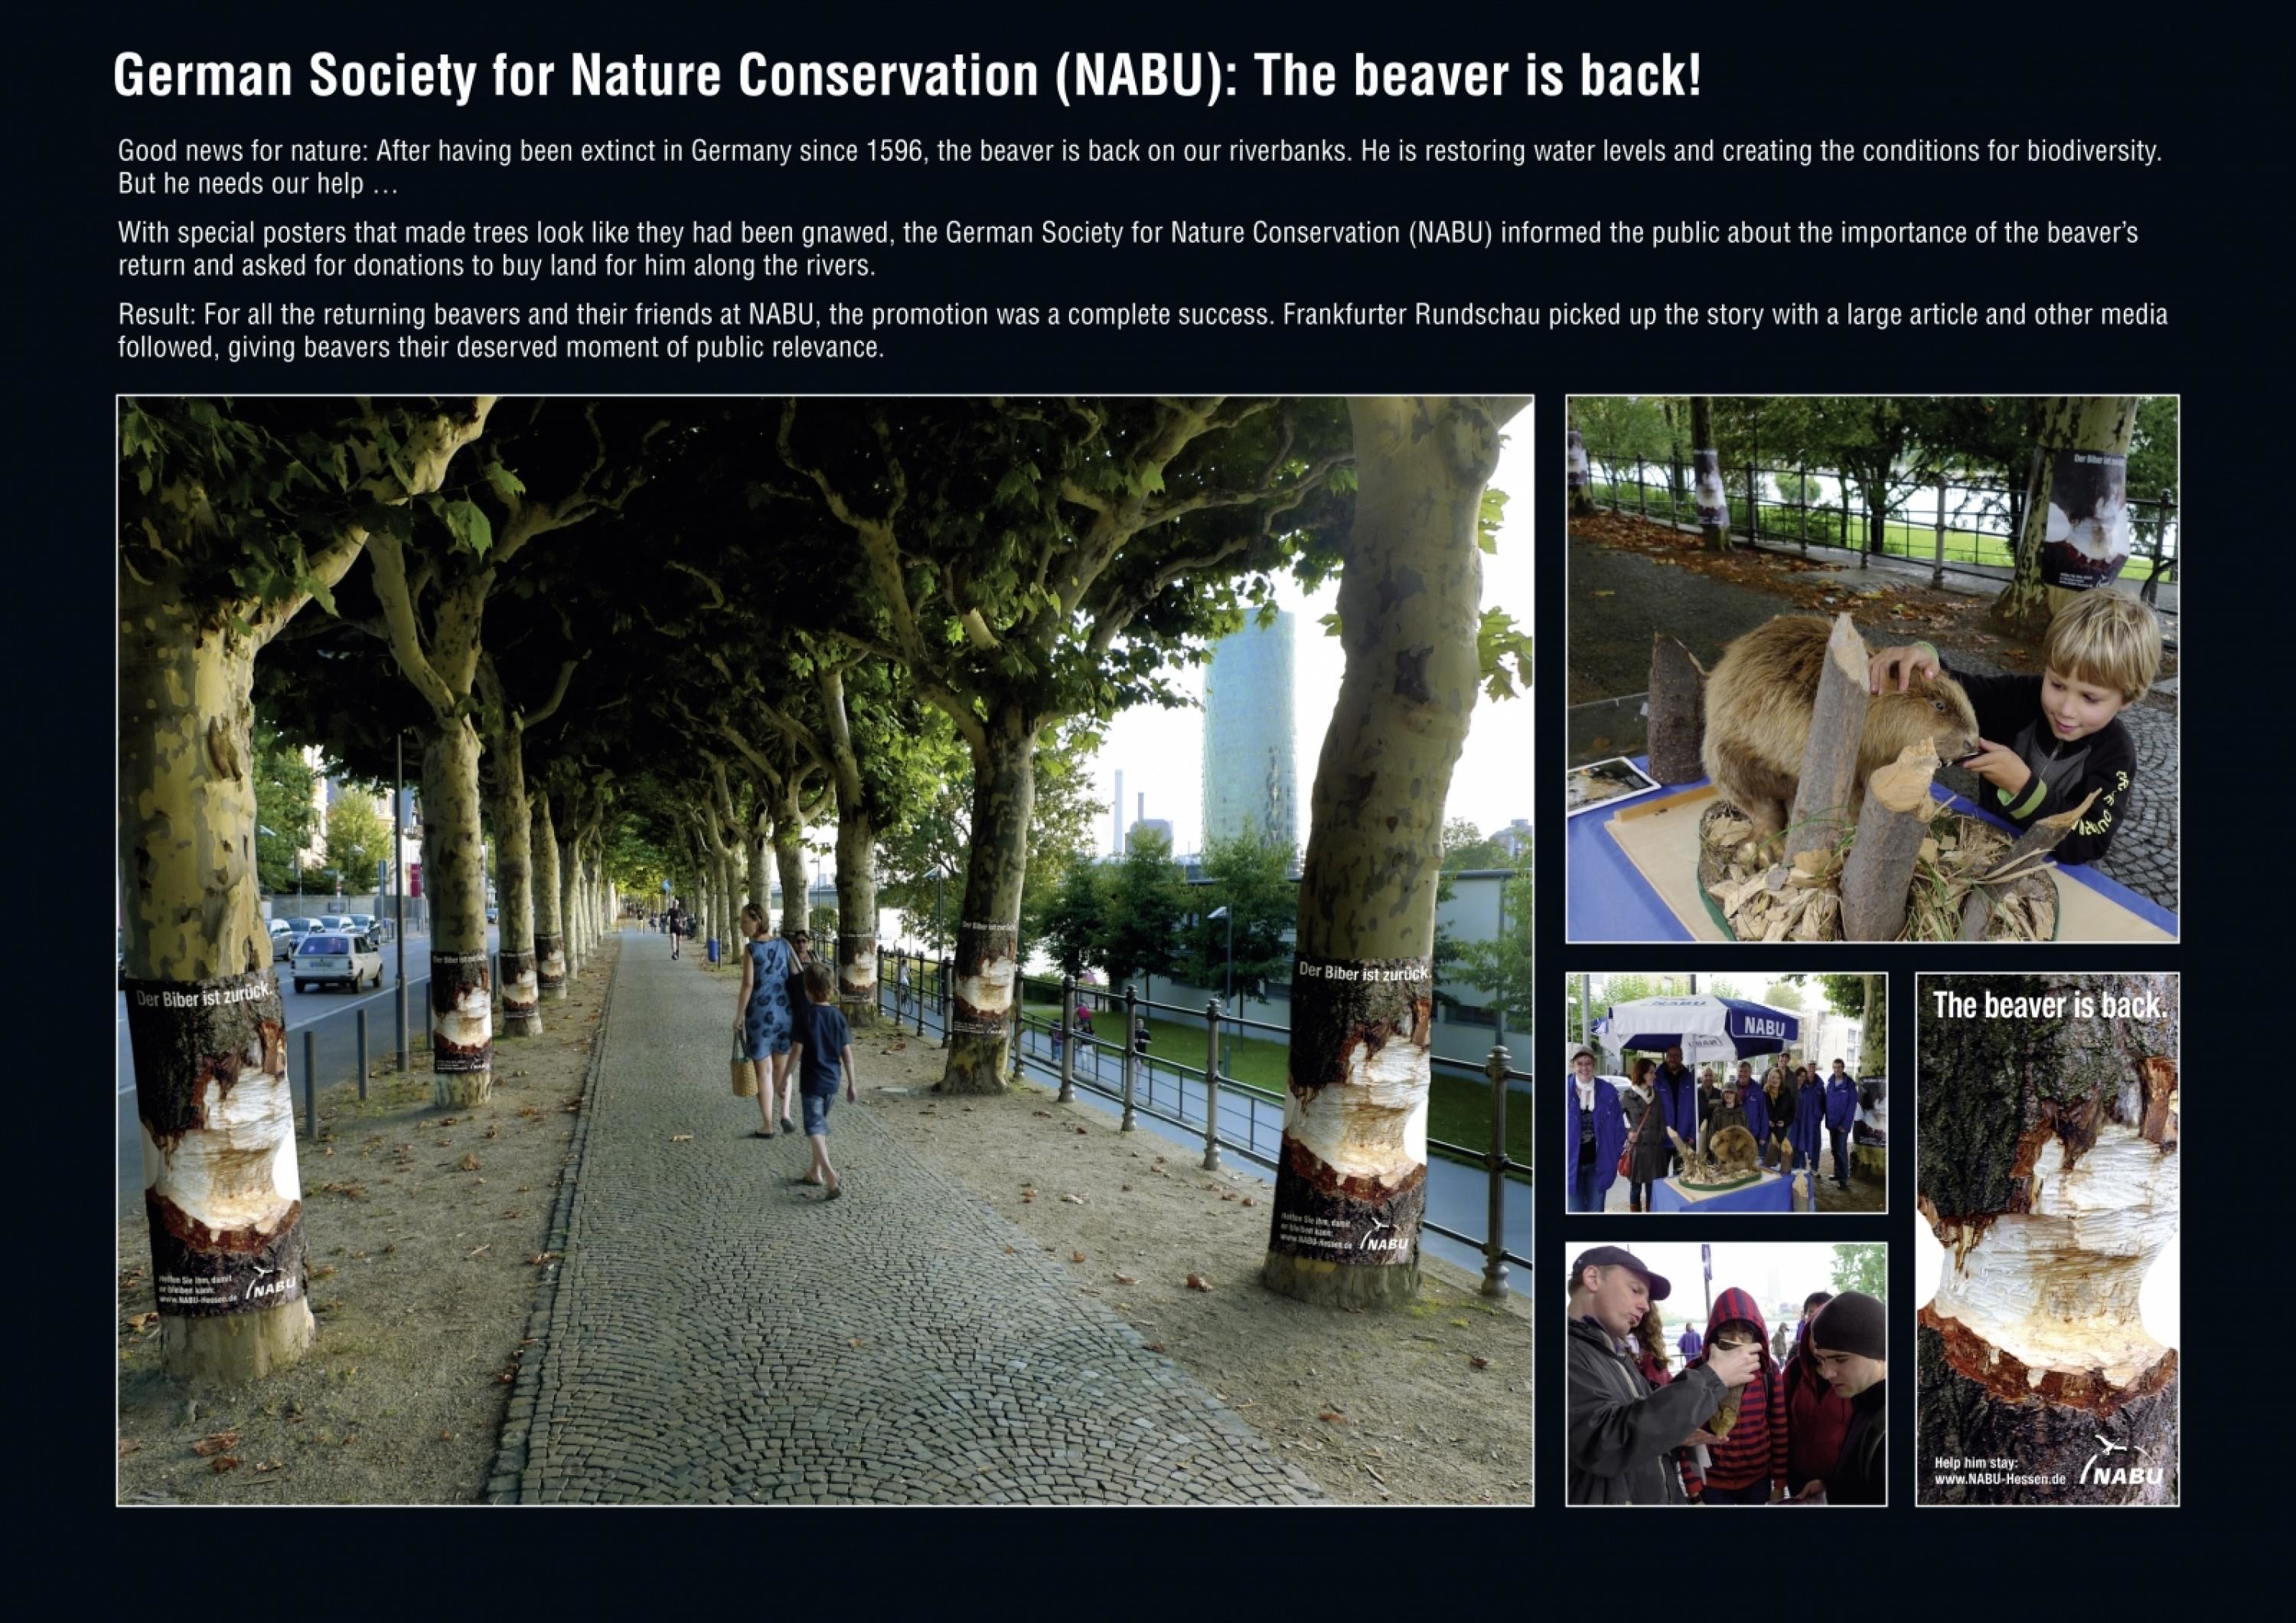 GERMAN SOCIETY FOR NATURE CONSERVATION